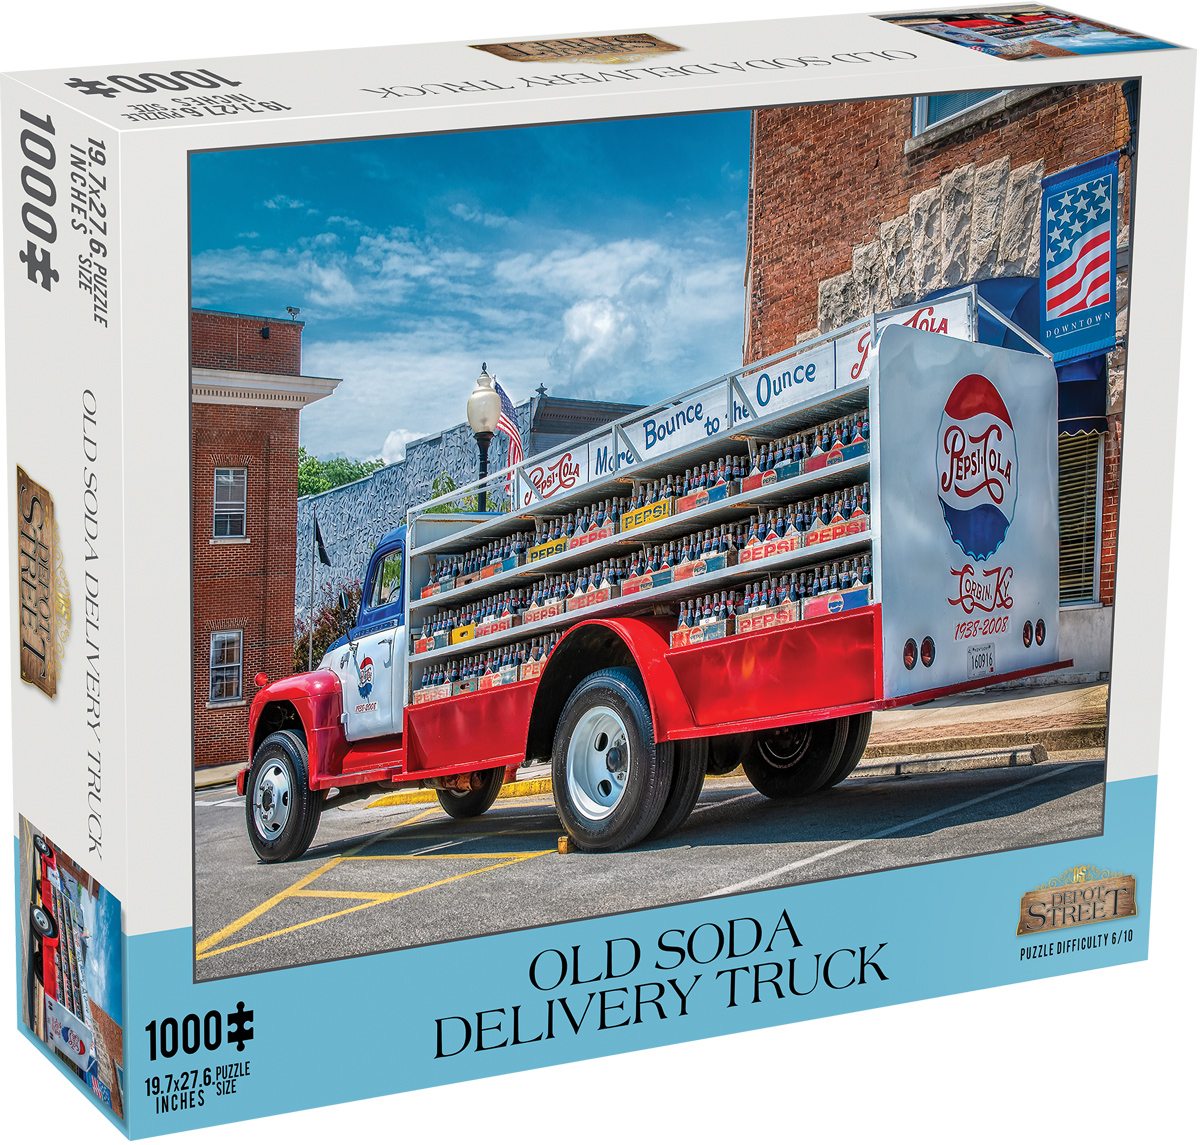 Old Soda Delivery Truck Puzzle